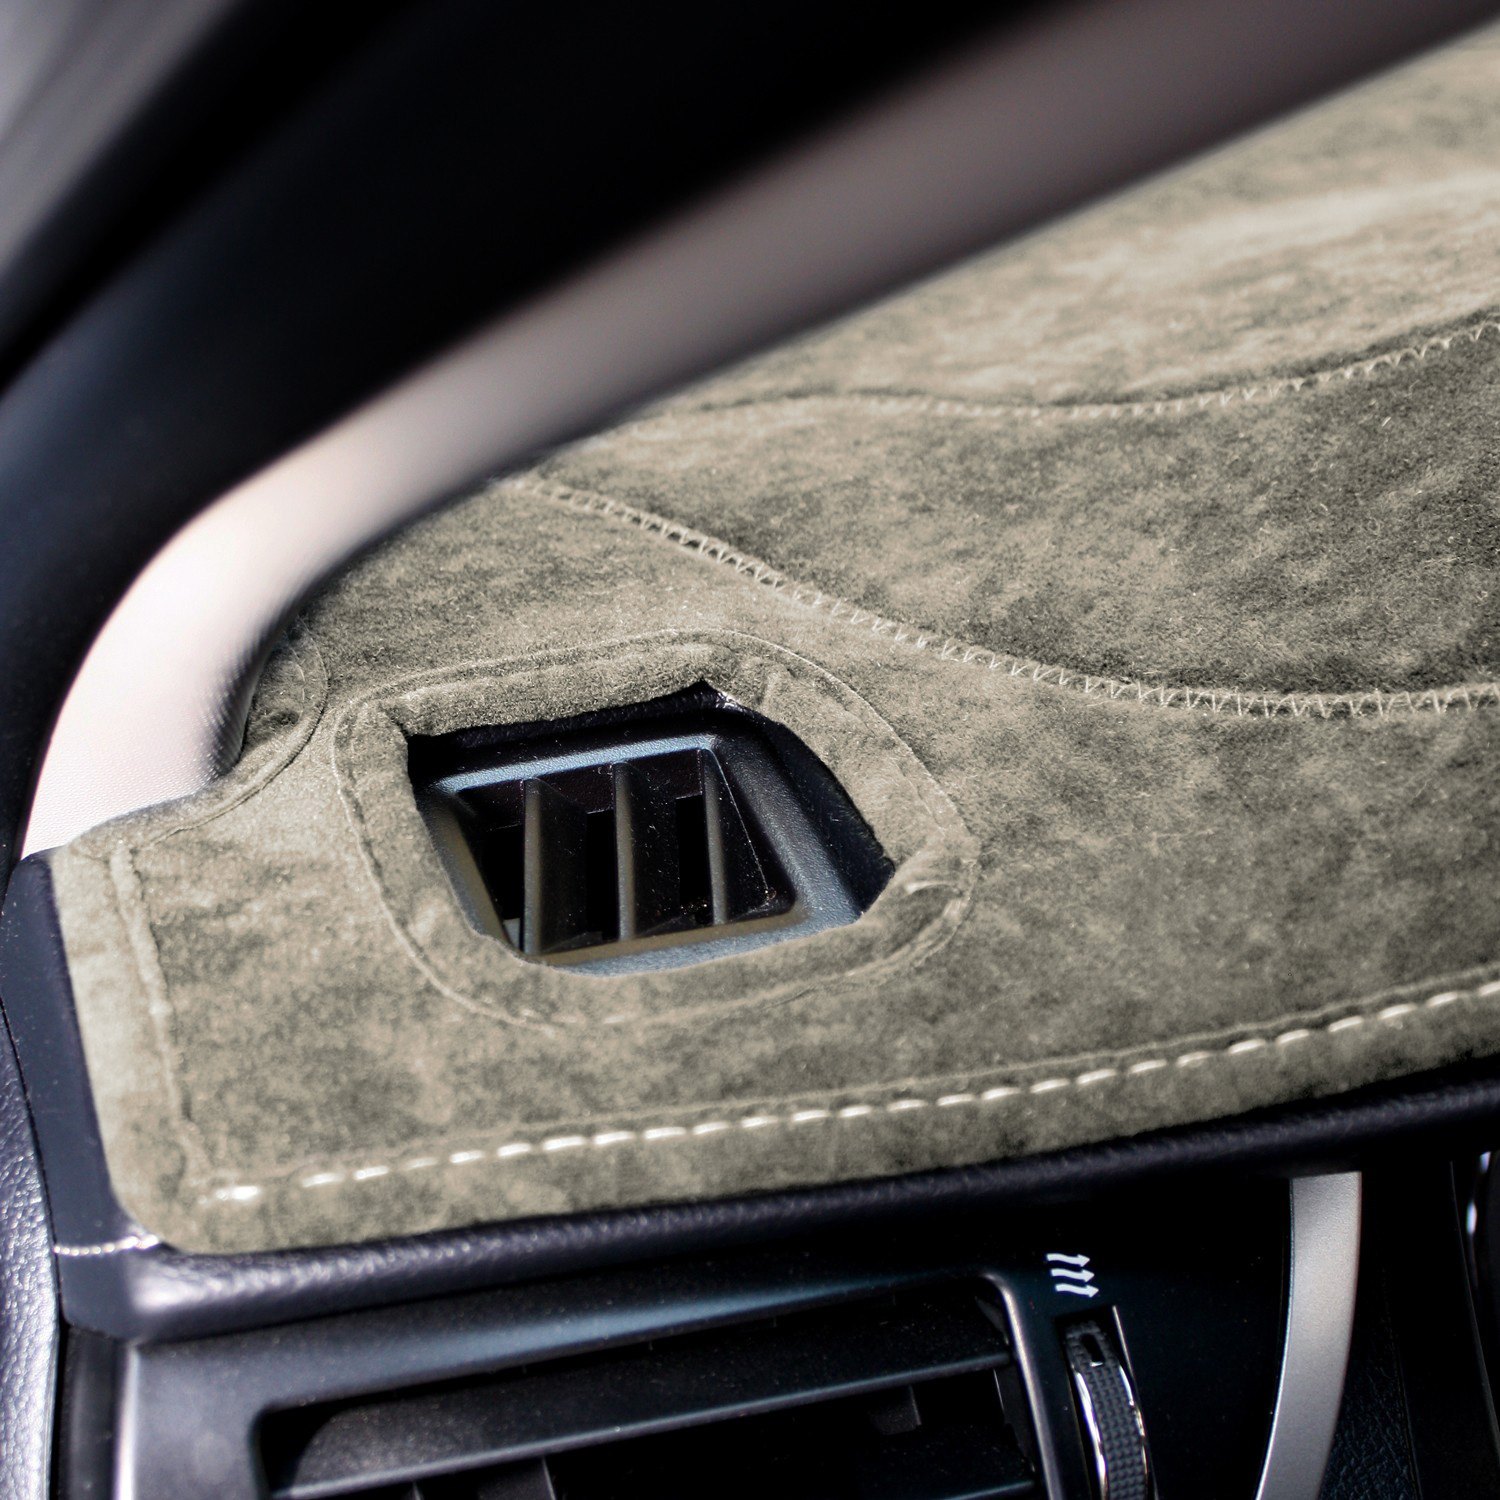 https://images.carid.com/coverking/dash-covers/suede-dash-cover.jpg